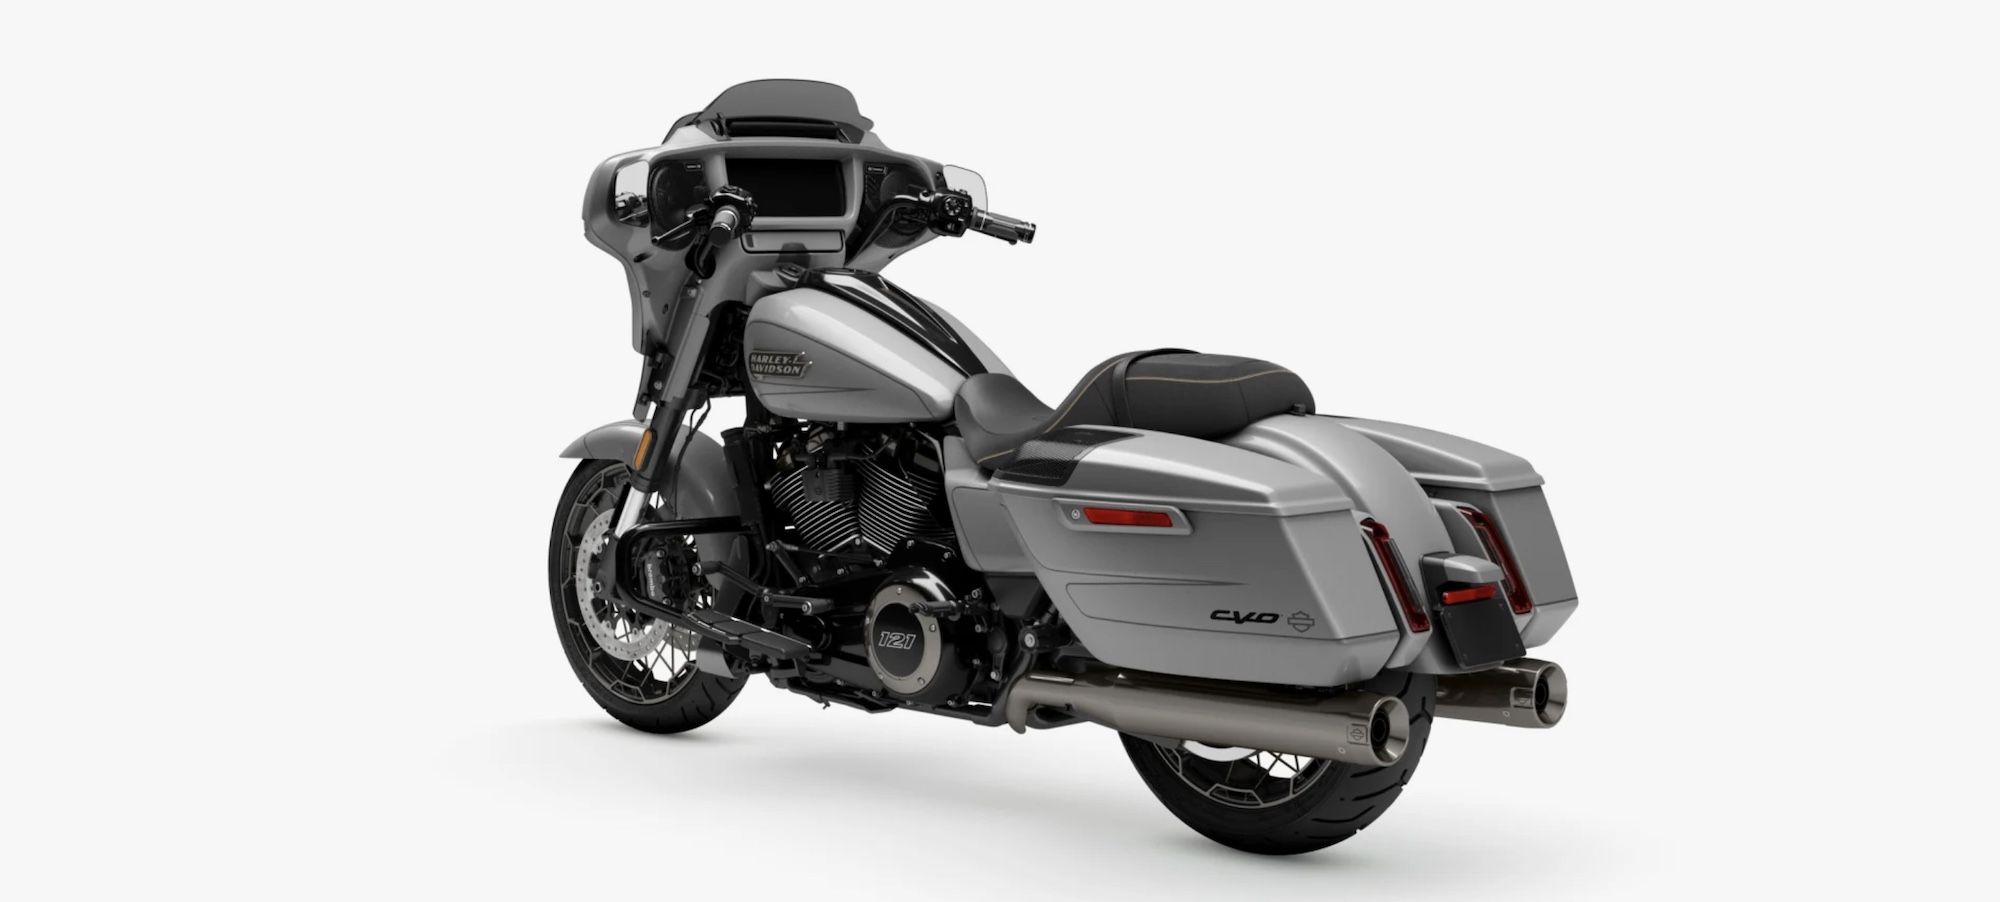 A back quarter view of Harley-Davidson’s 2023 Street Glide CVO motorcycle.